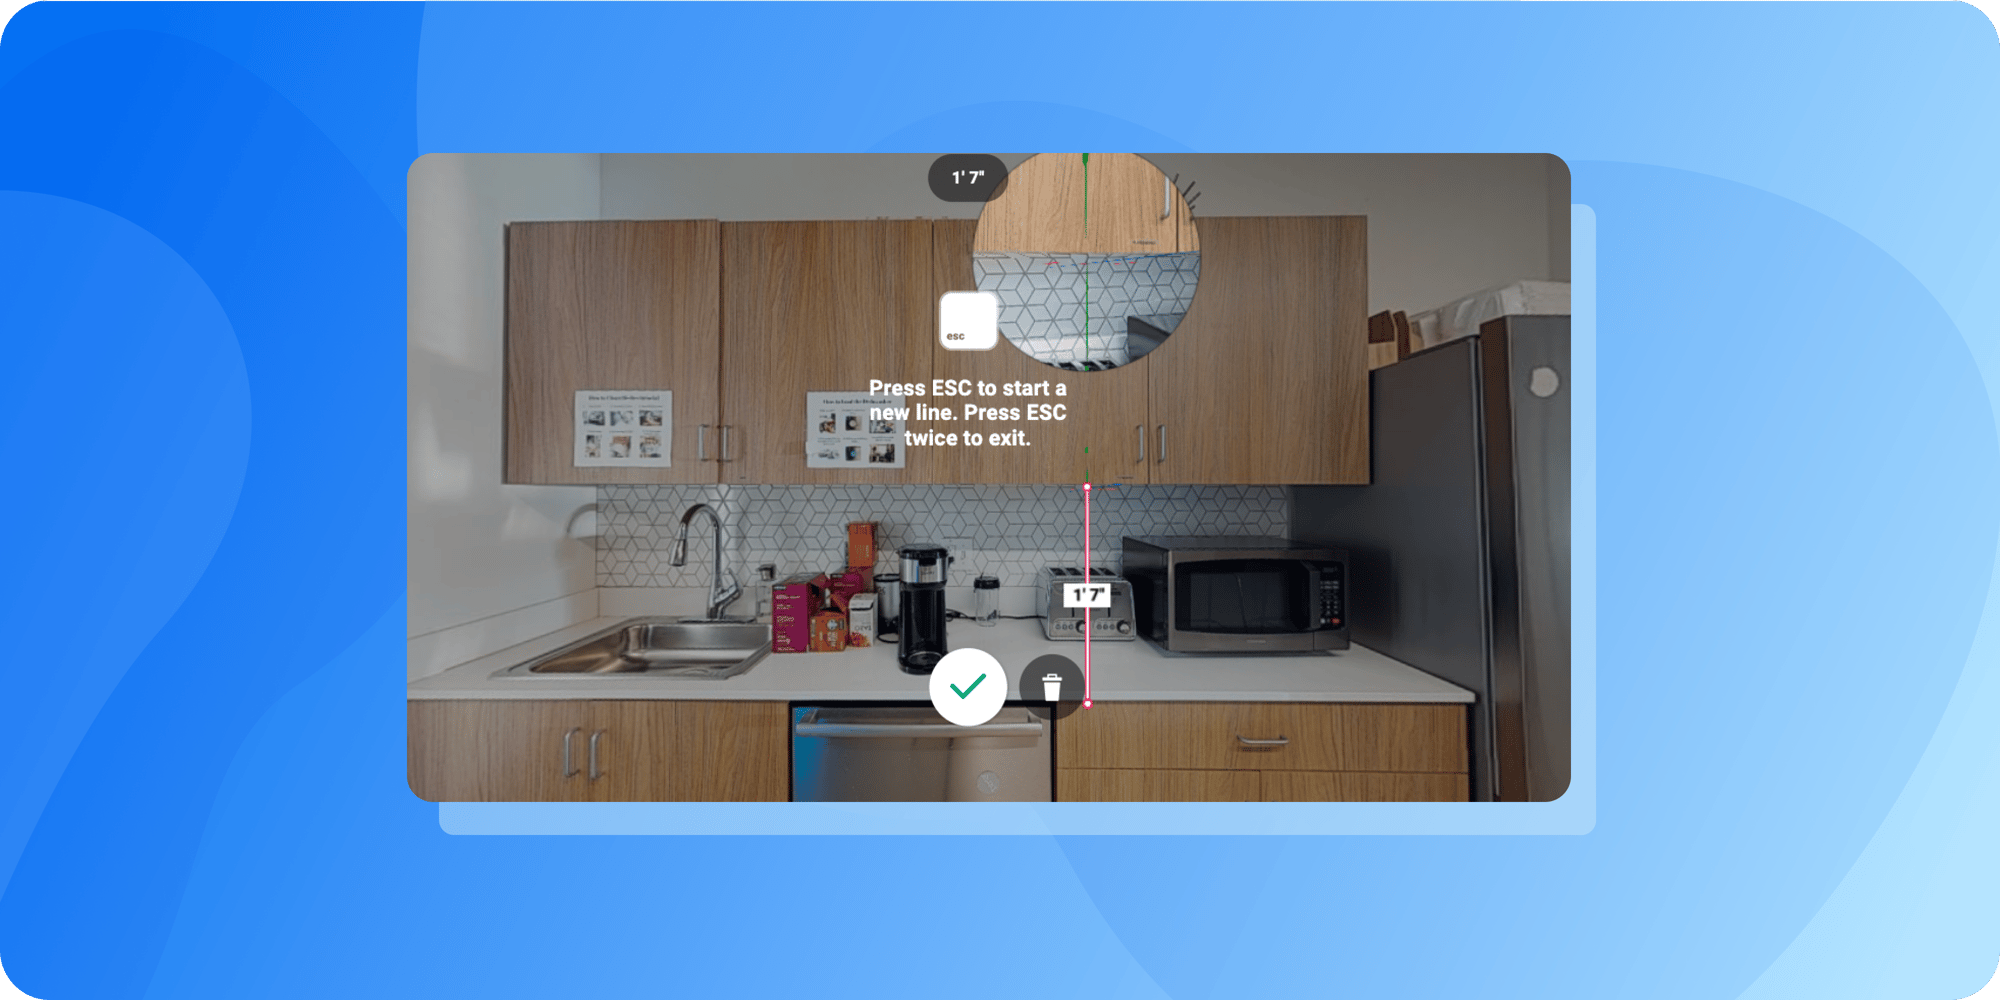 Matterport provides structural insights for your office pantry and kitchen